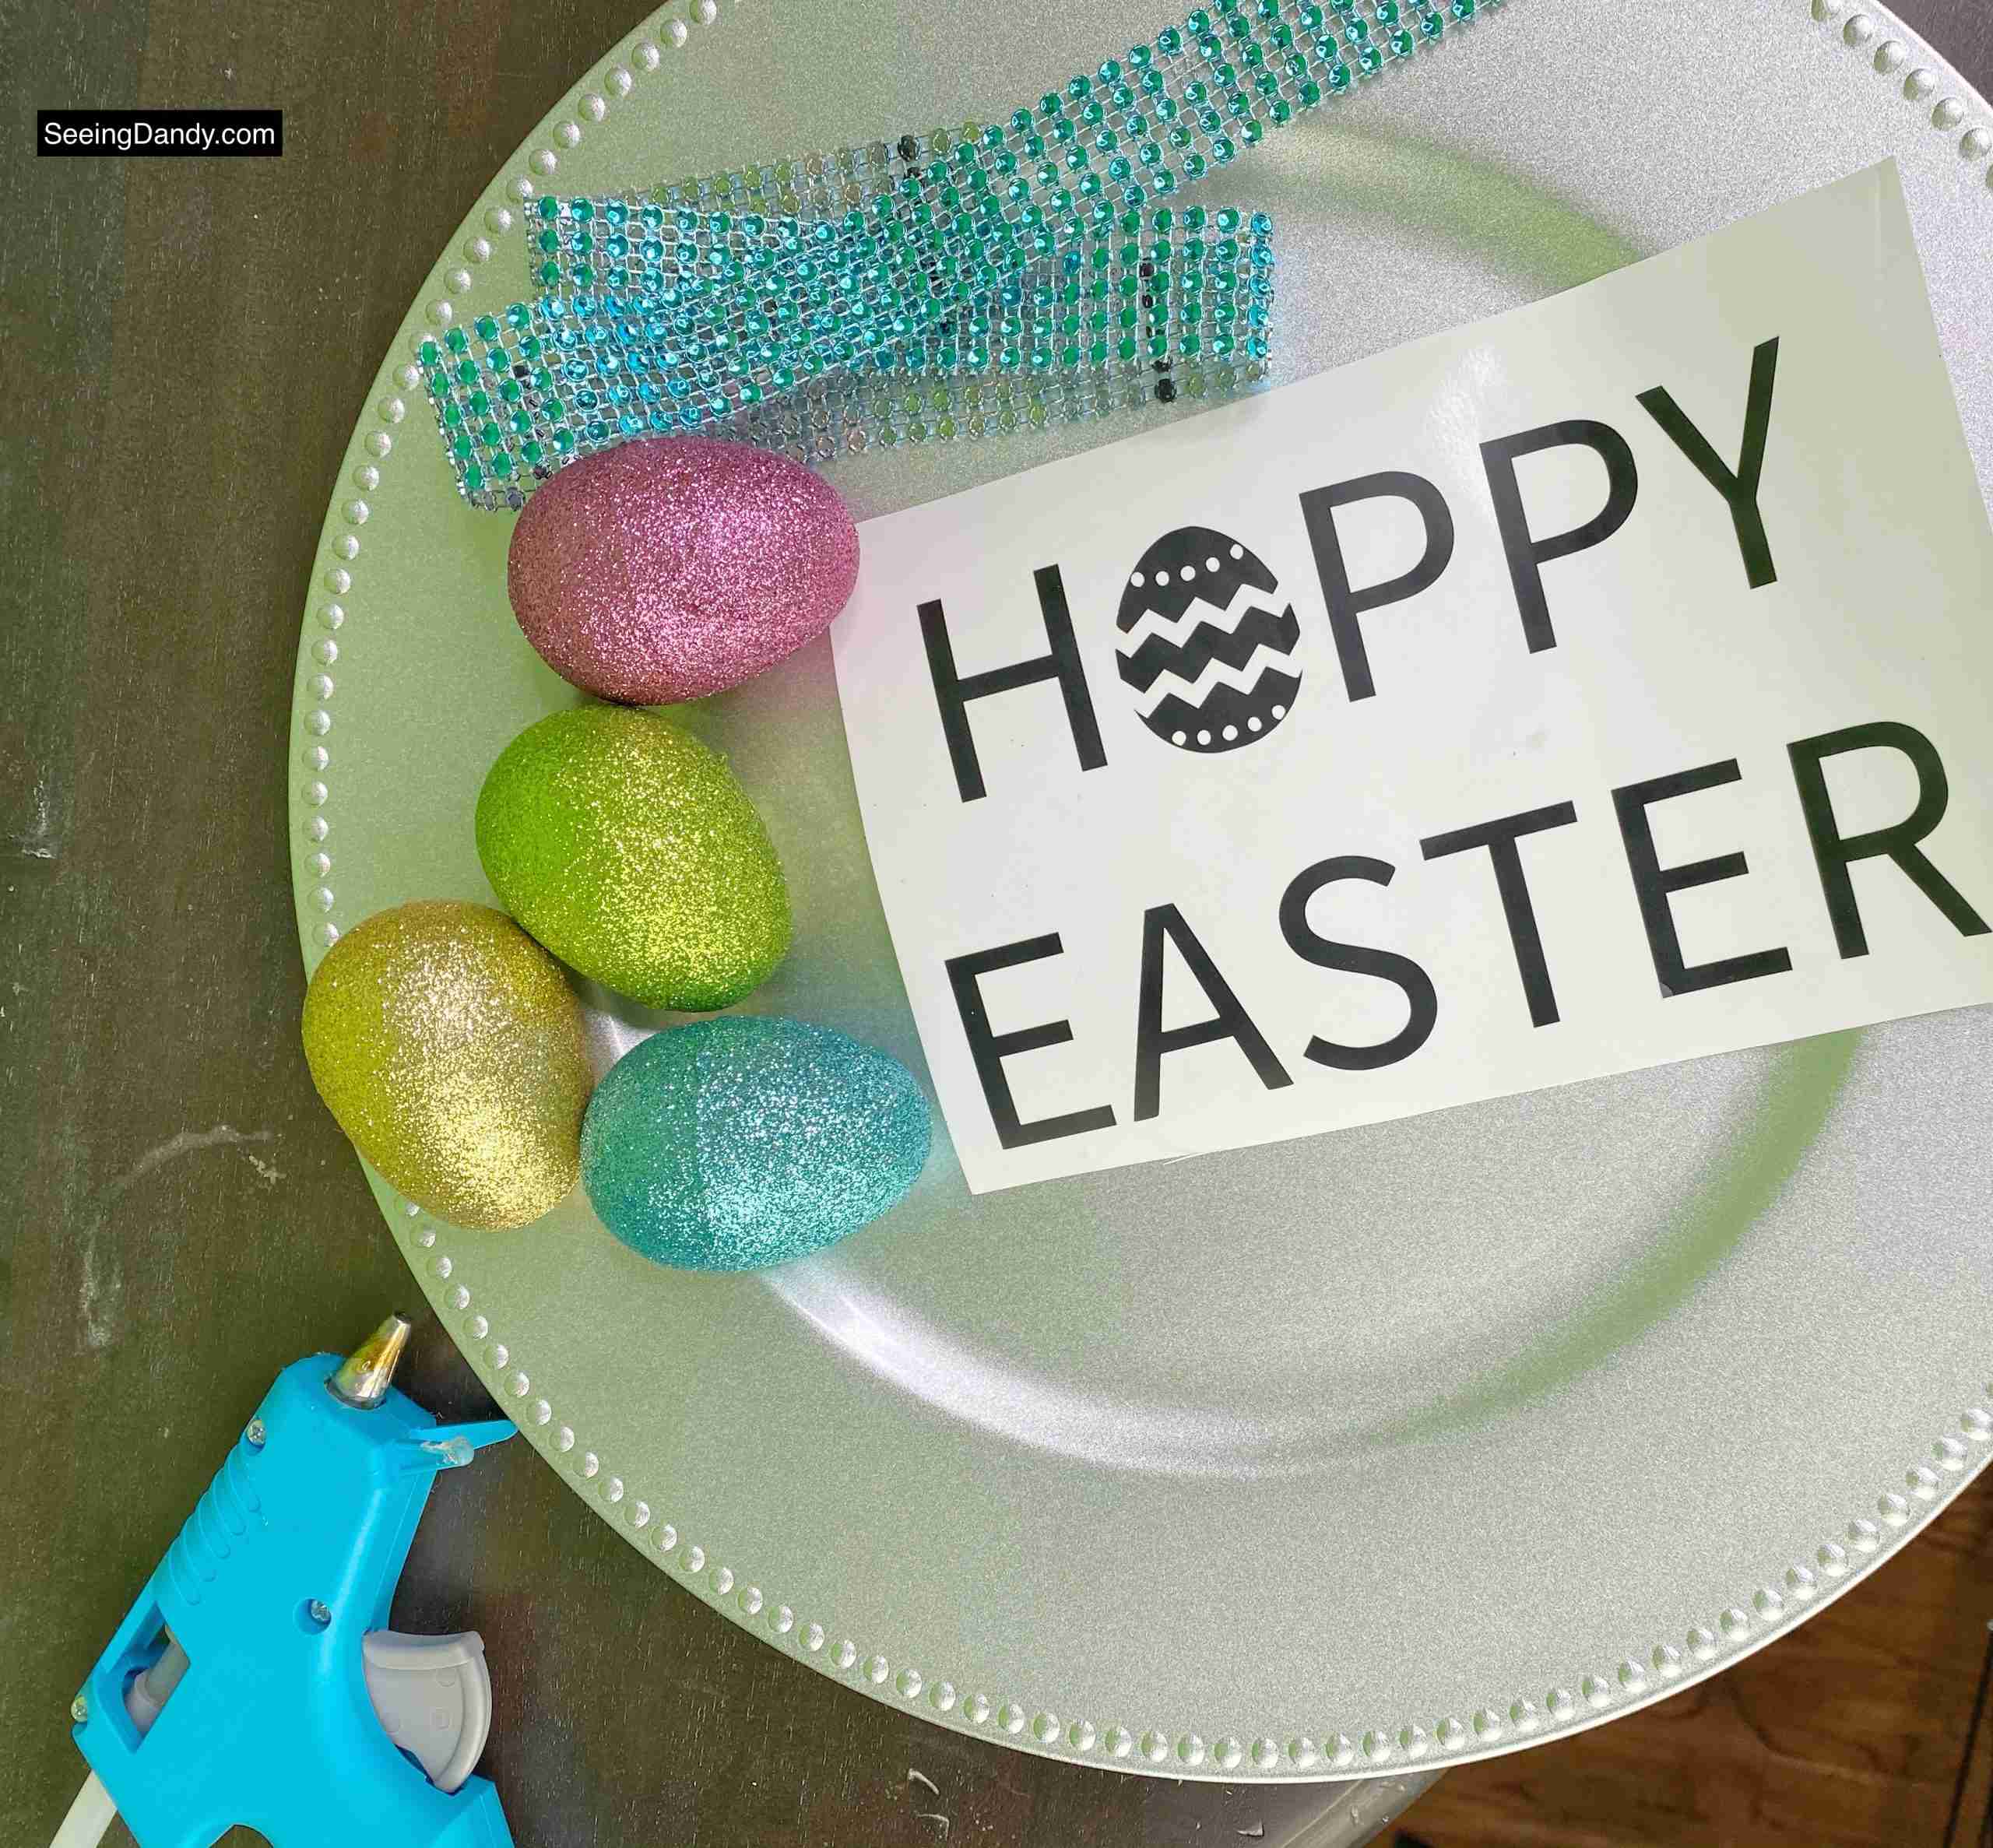 free svg file, dollar tree glitter easter eggs, happy easter svg file, hoppy easter svg file, vinyl craft idea, silver charger plate, dollar tree plastic charger plate, glue gun, teal jeweled ribbon